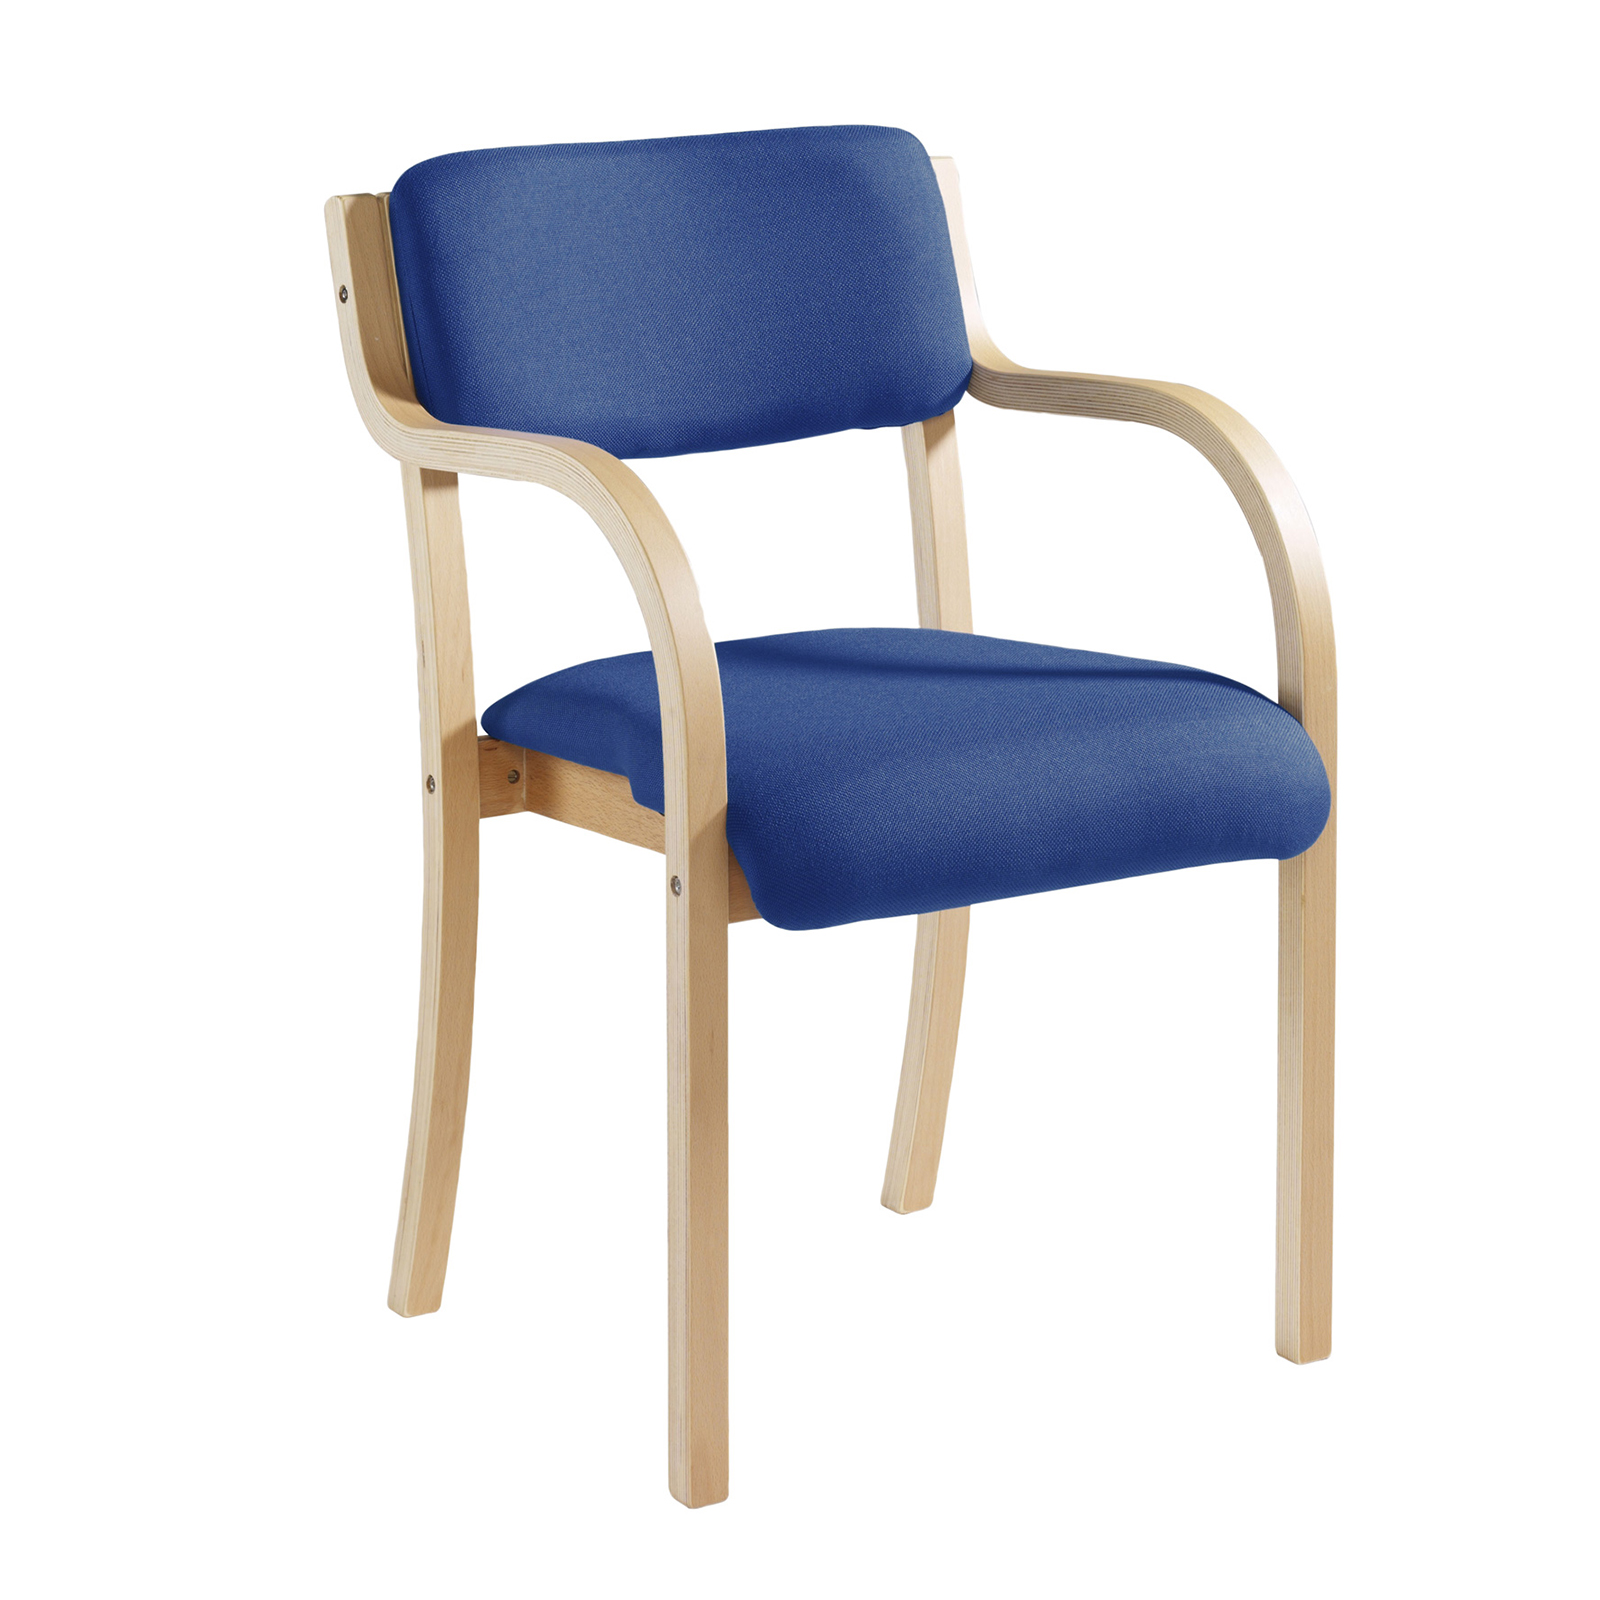 Prague wooden conference chair with double arms - blue